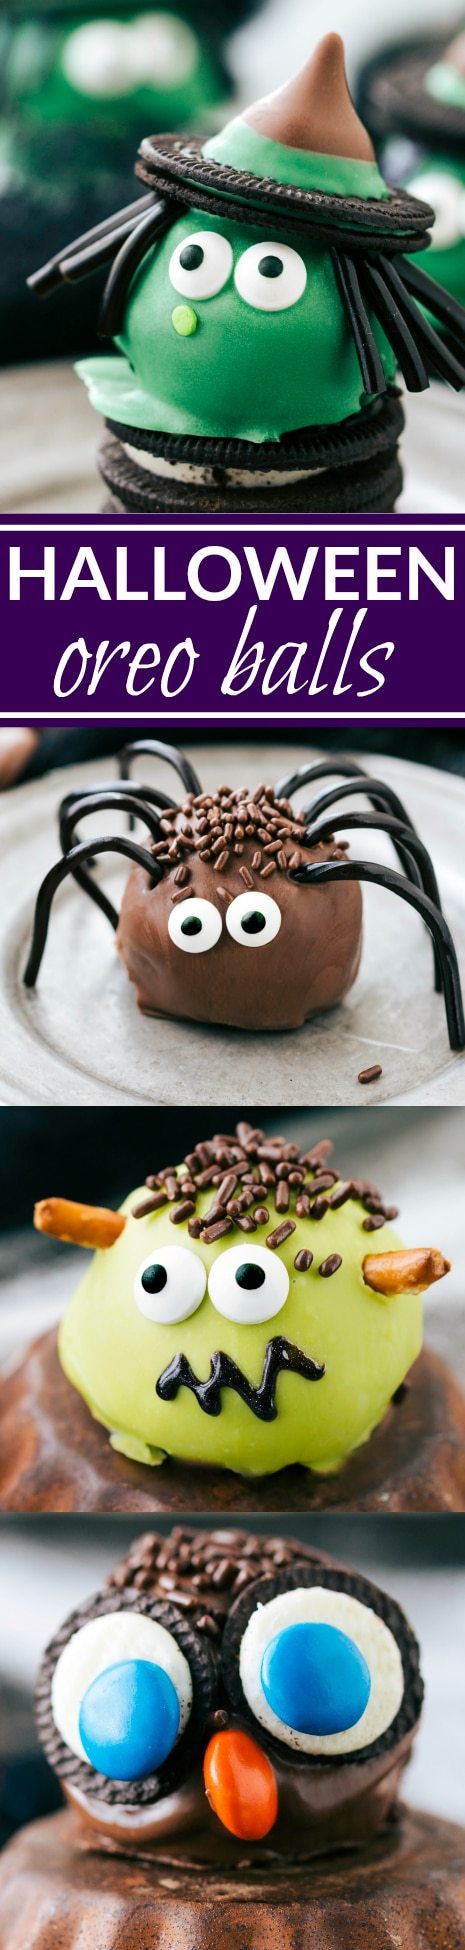 Four different ways to dress up an oreo ball for Halloween -- a witch, spider, frankenstein, and an owl. Easy and delicious treats that are perfect for a party! Recipe via chelseasmessyapron.com